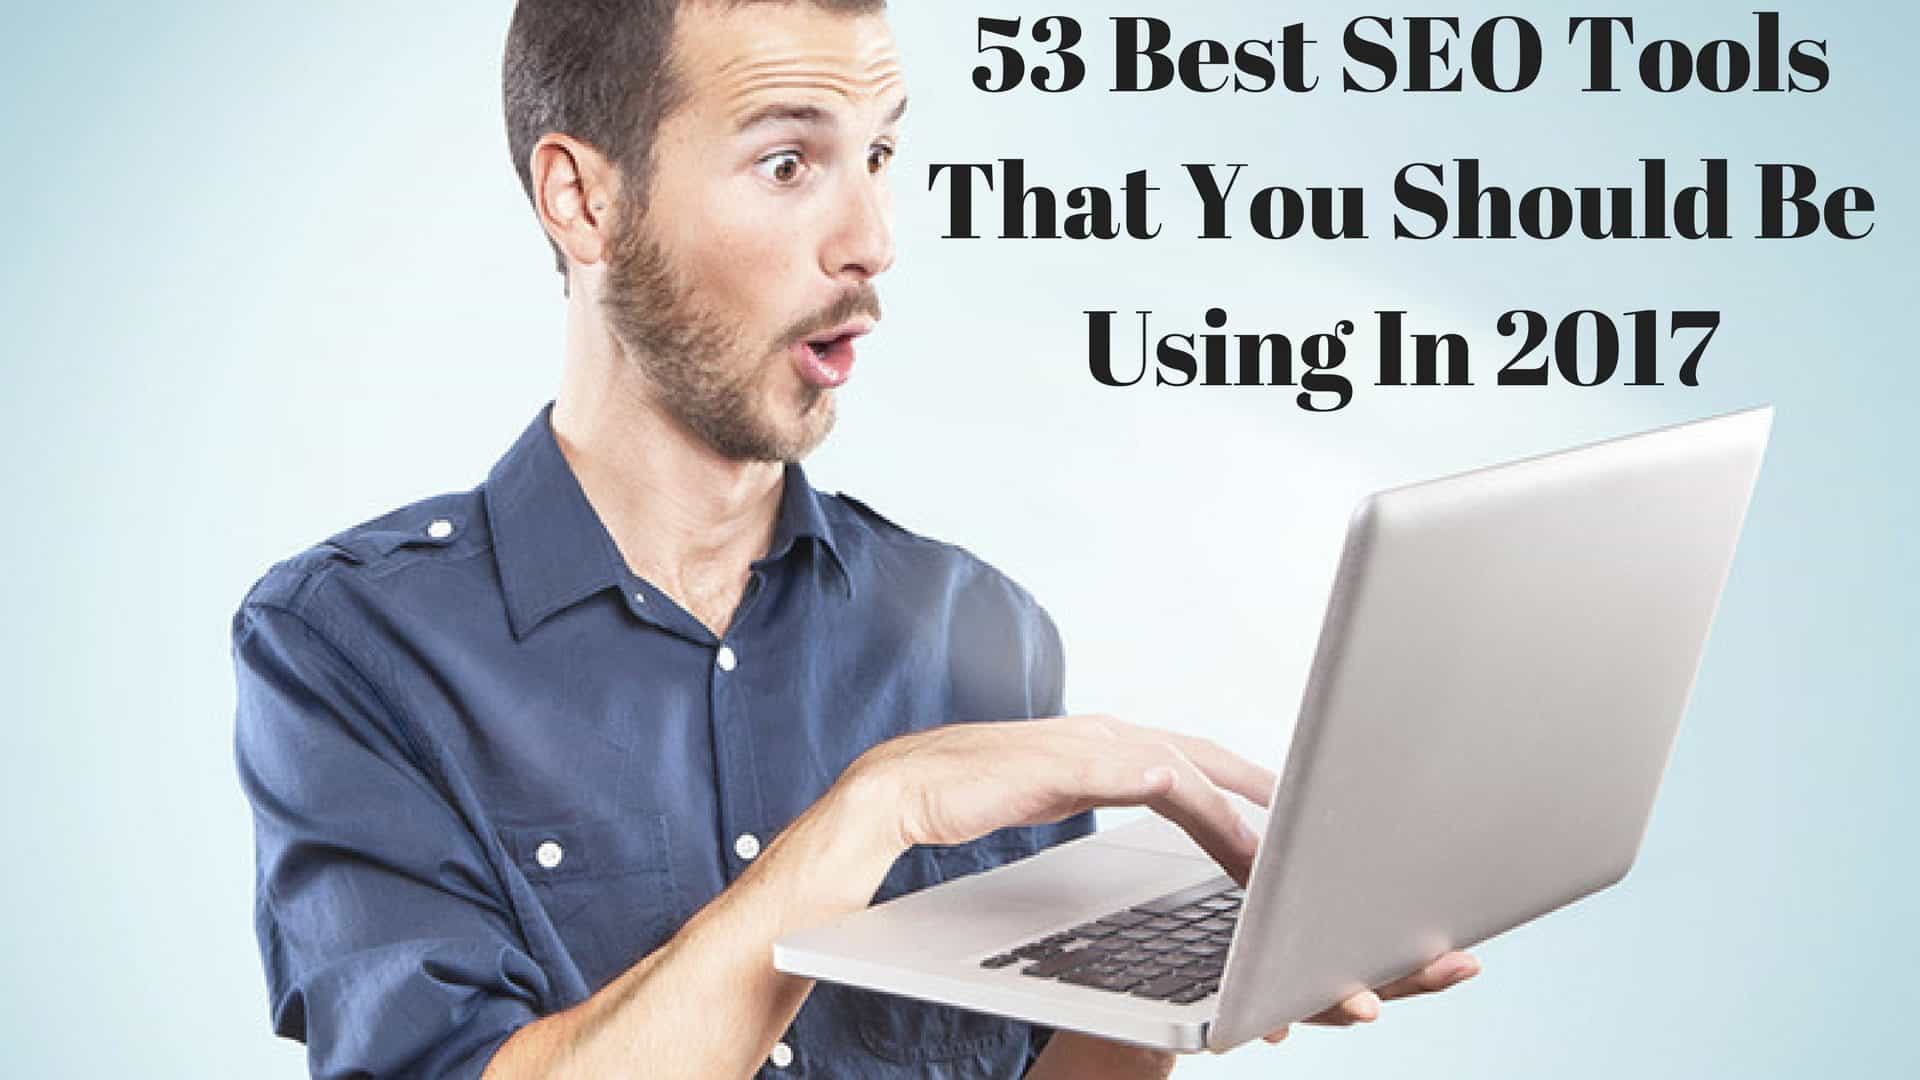 70+ Best SEO Tools You Should Be Using In 2017